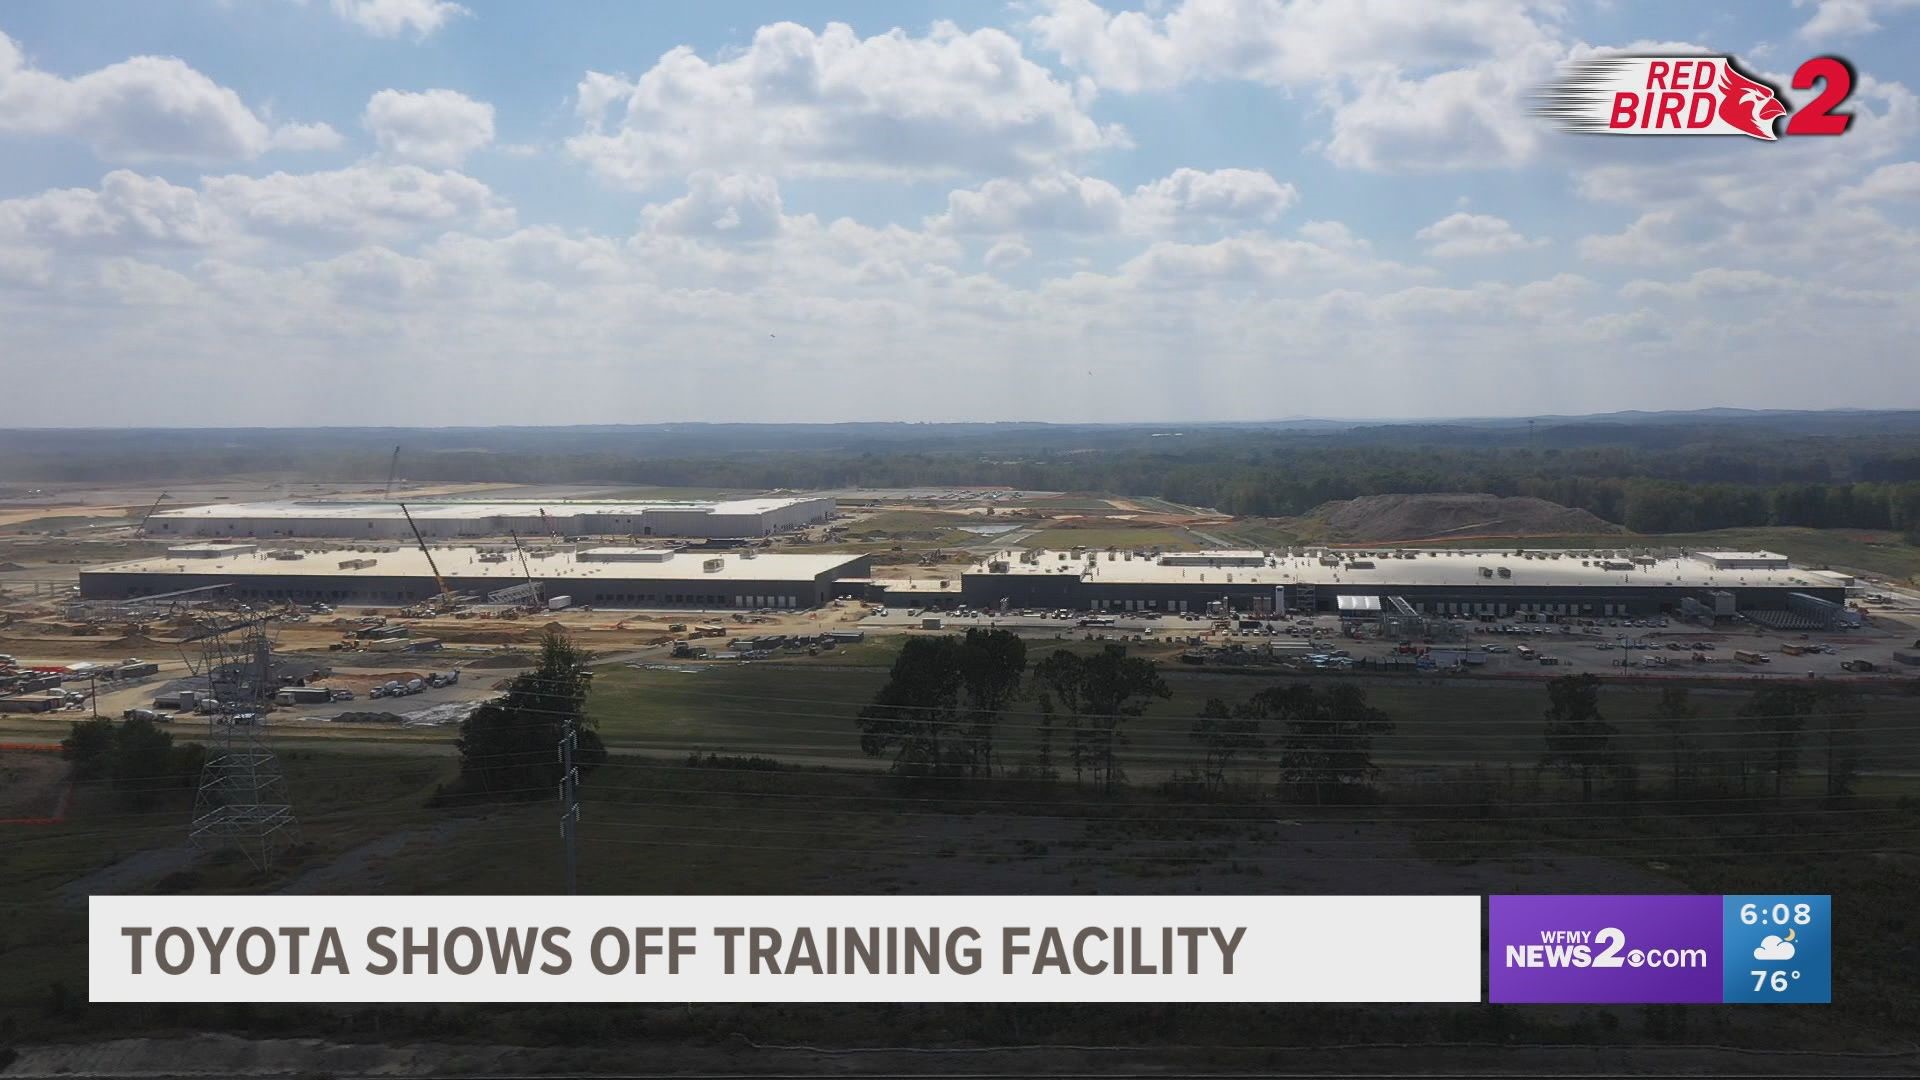 The battery plant at the Greensboro-Randolph Megasite is still under construction, but 200 Toyota employees are already being trained.